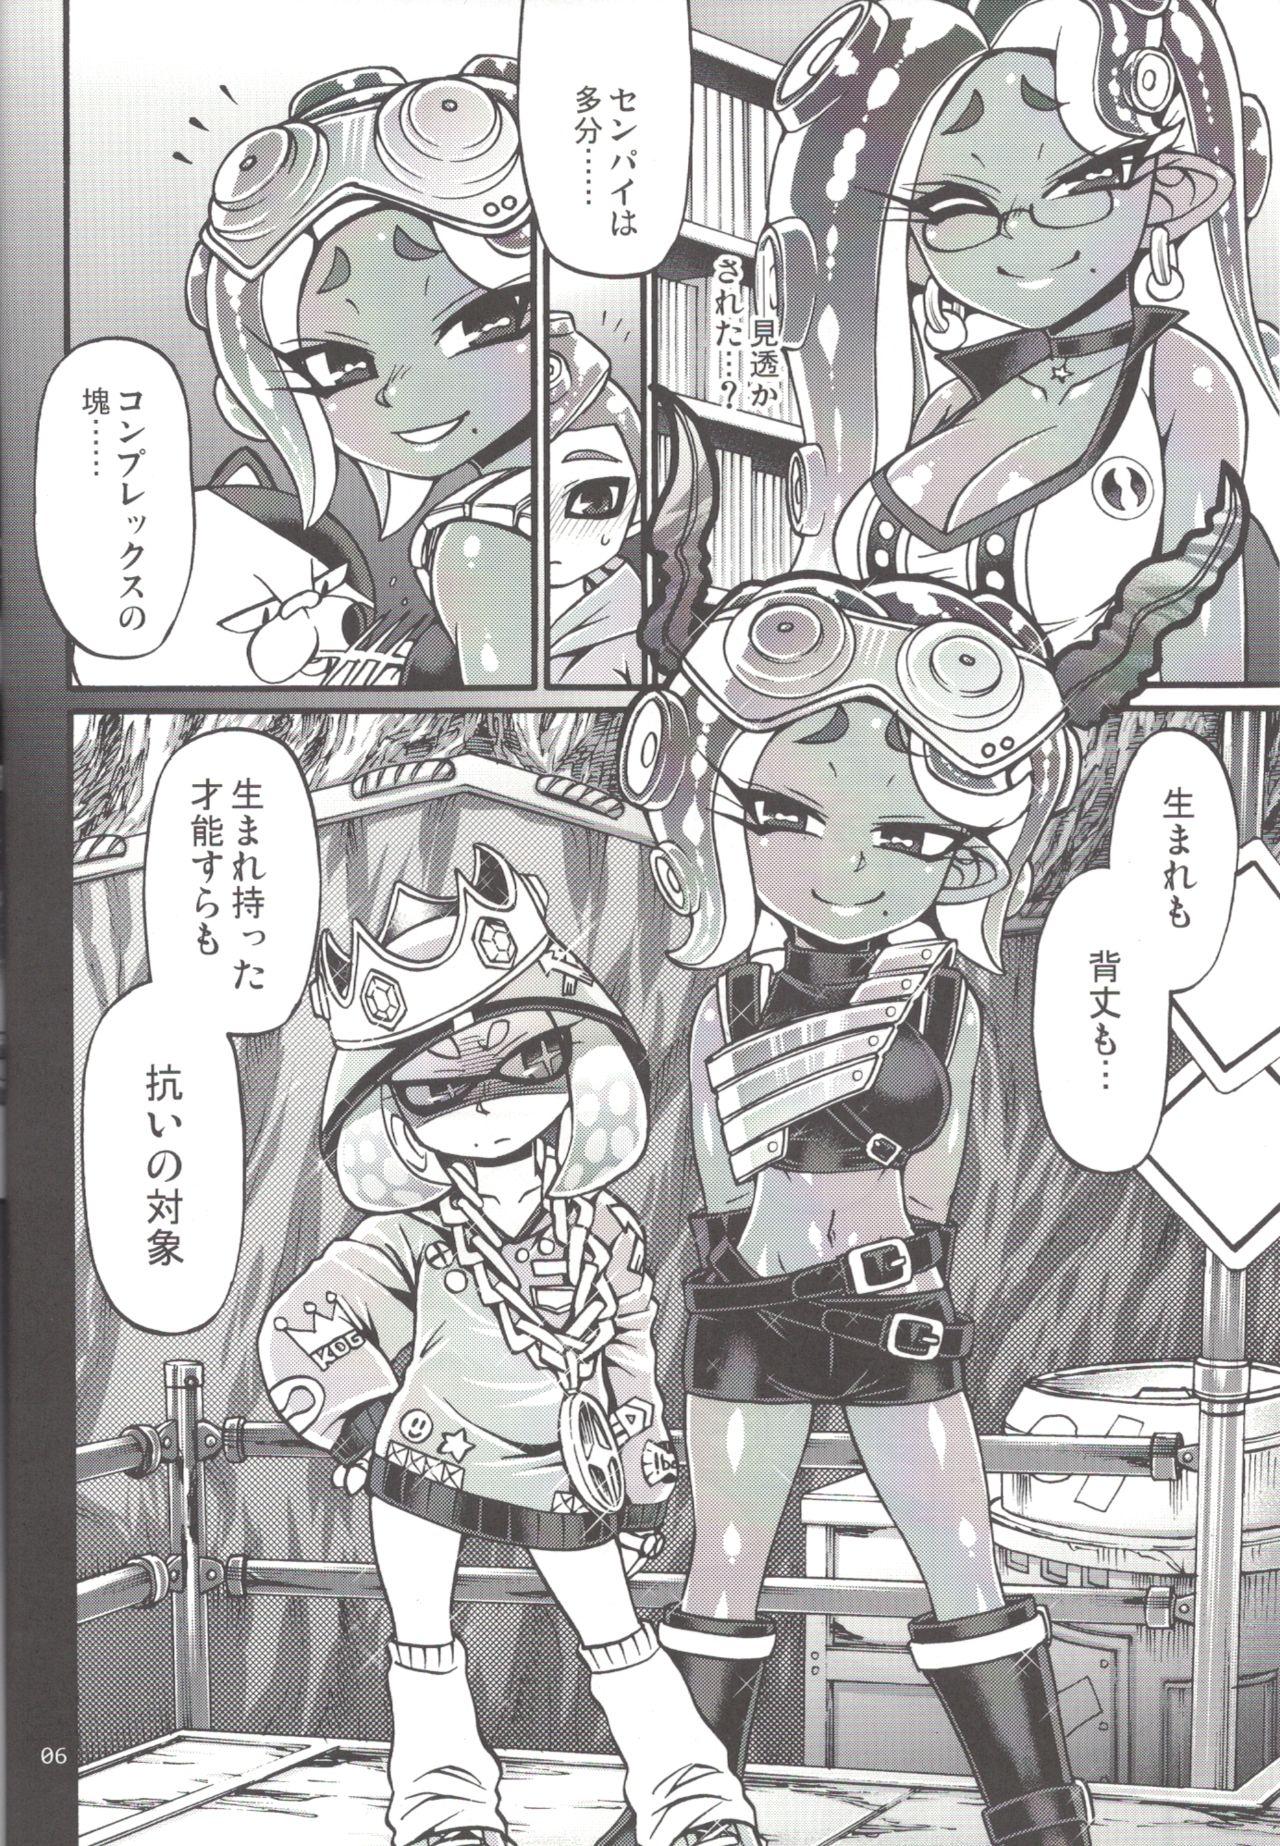 Threesome Slowly you will be loved - Splatoon Three Some - Page 5